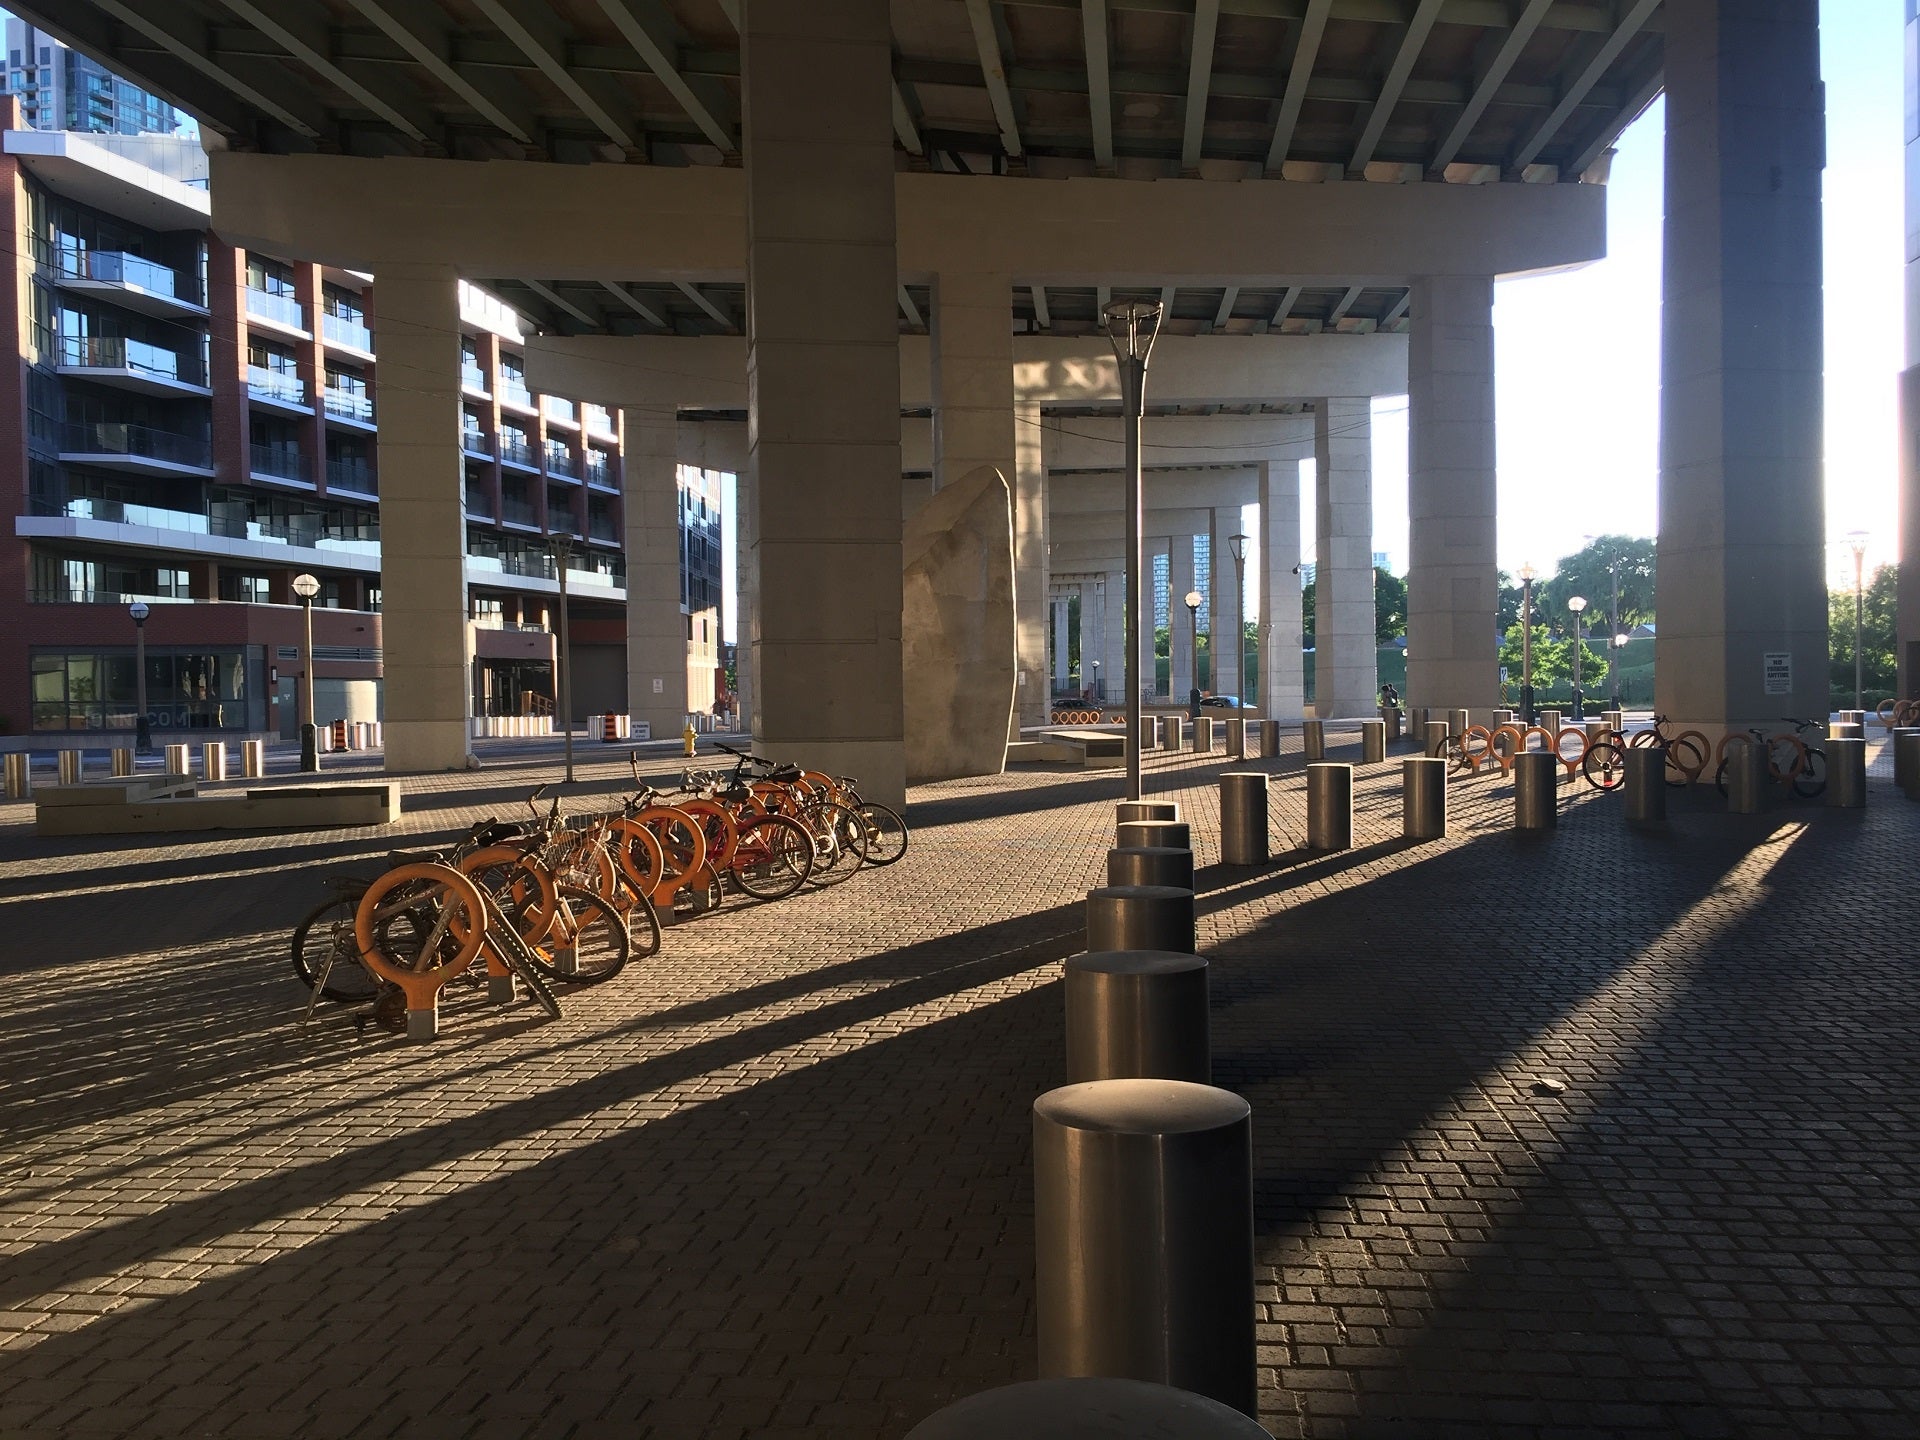 Creating a community space under the Gardiner Expressway.